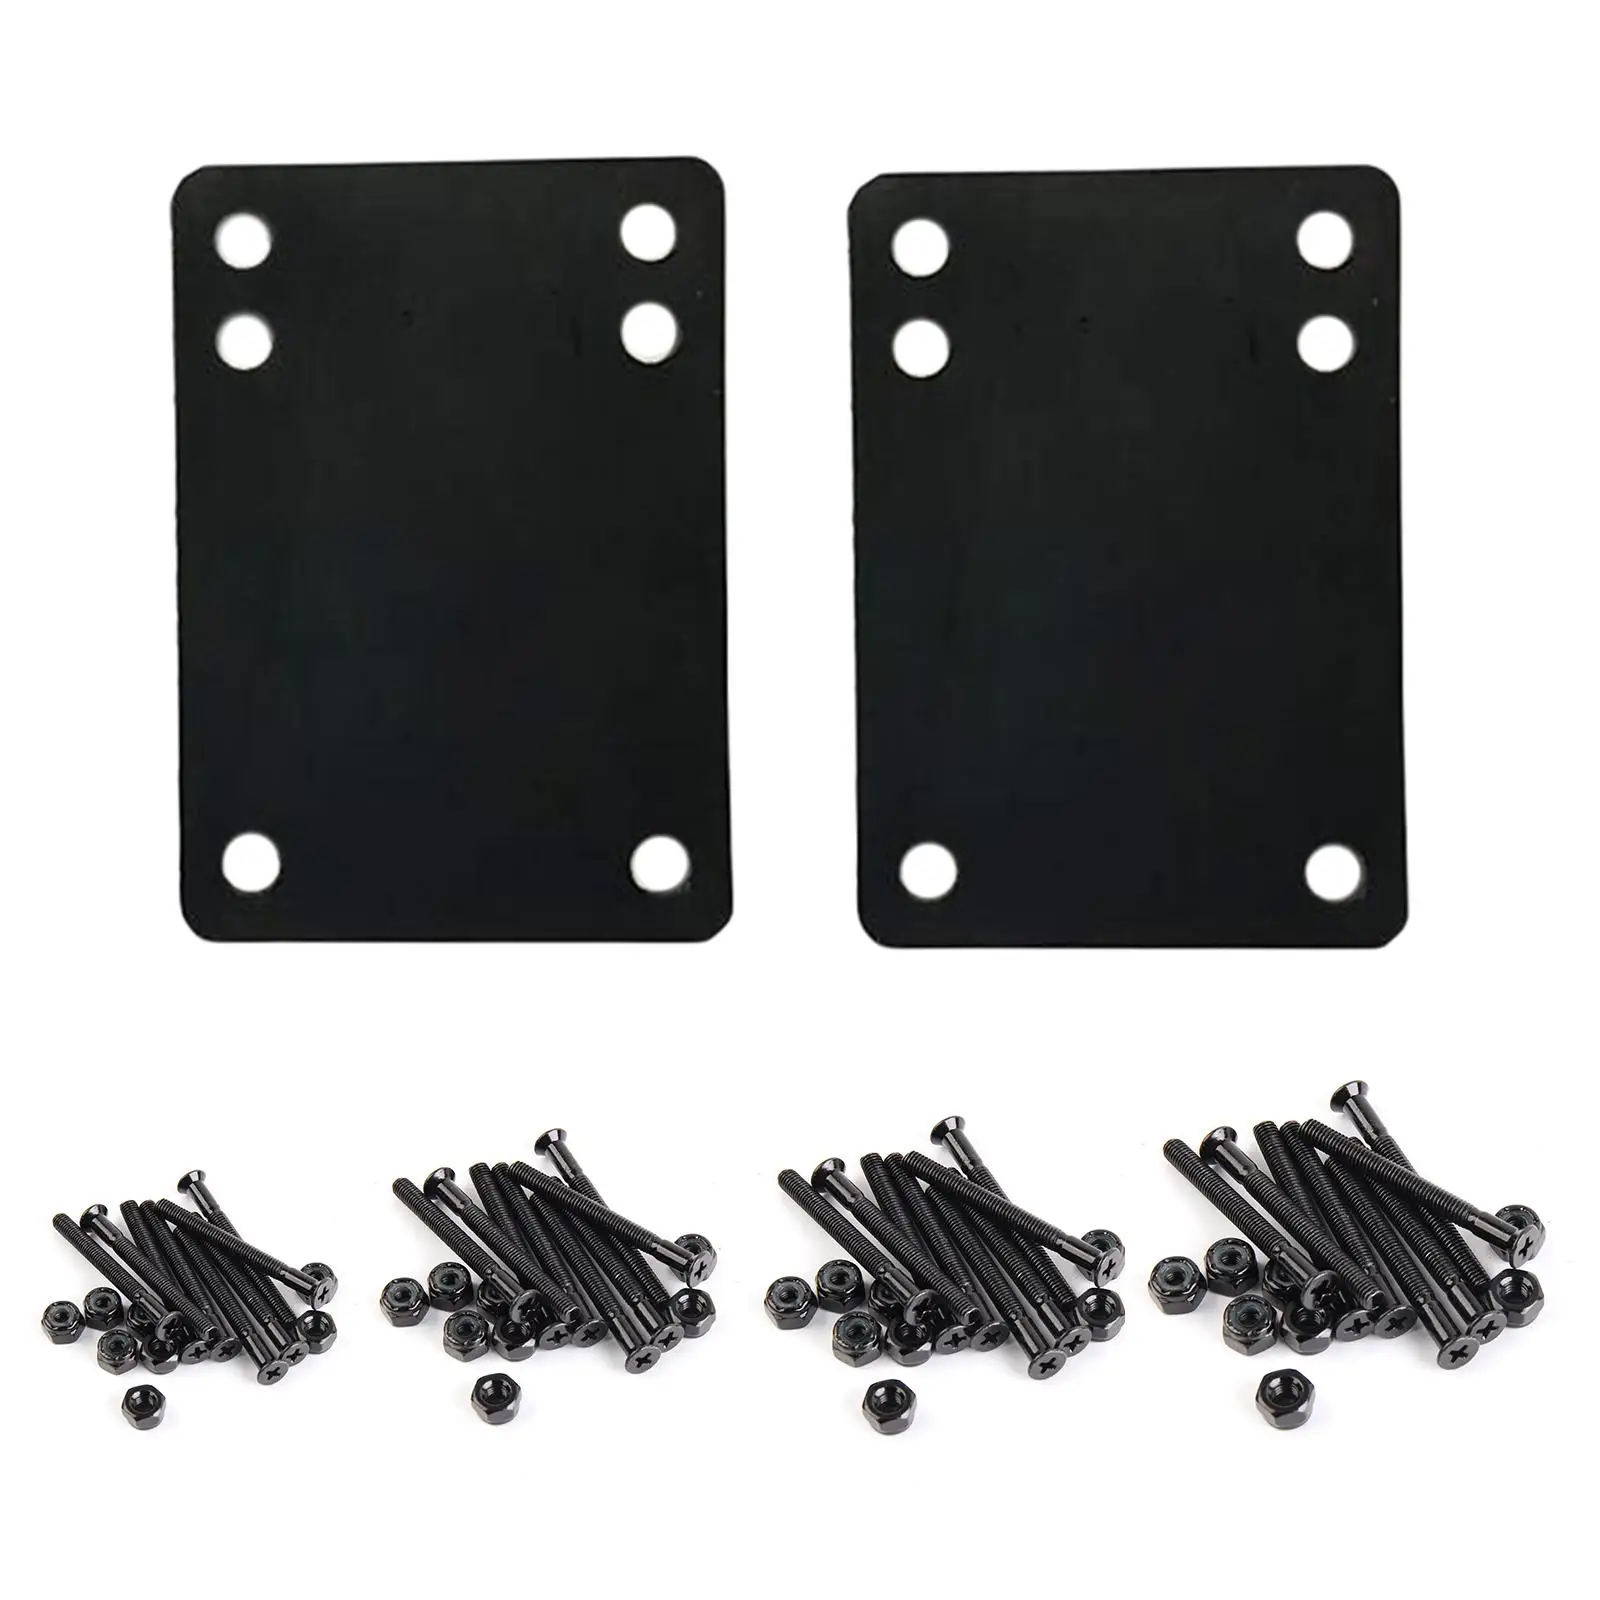 8x Deluxe Skateboard Truck Screws Deck Bolts Nuts Riser Shock Pads Rise Pad